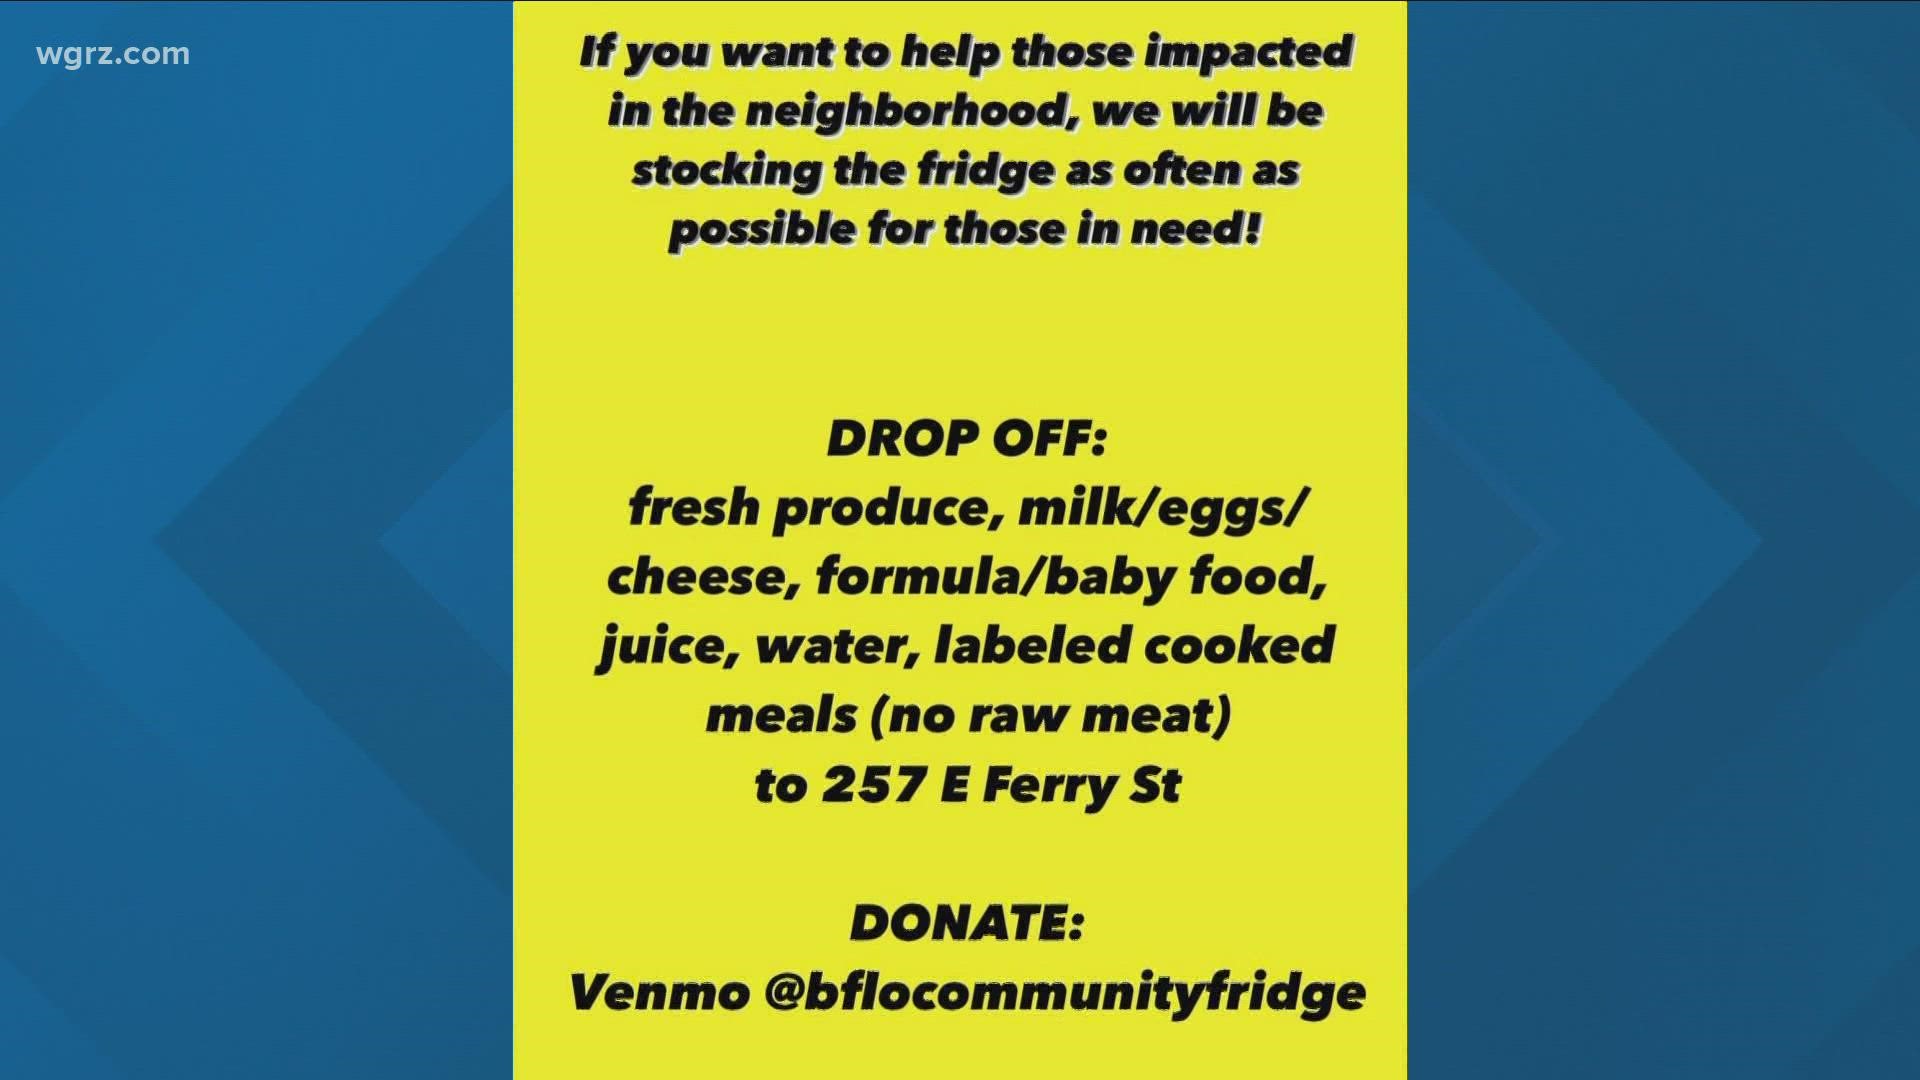 You can drop off donations or volunteer to help stock the fridge at their location on East Ferry Street.